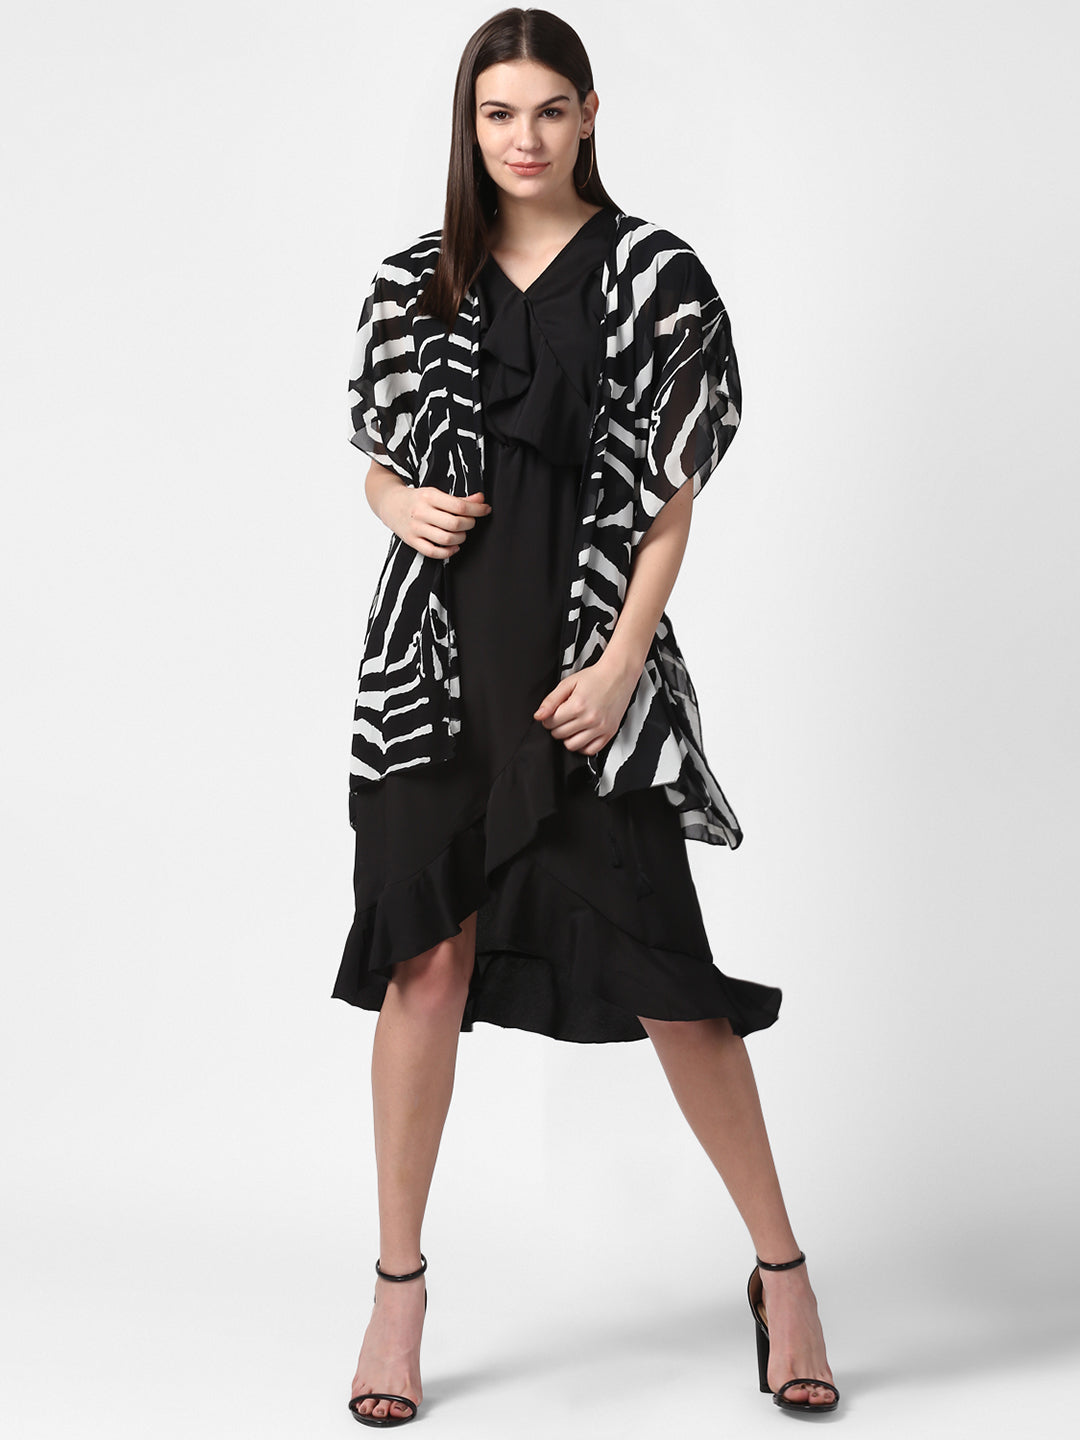 Women's Black and White Georgette Printed Open Shrug